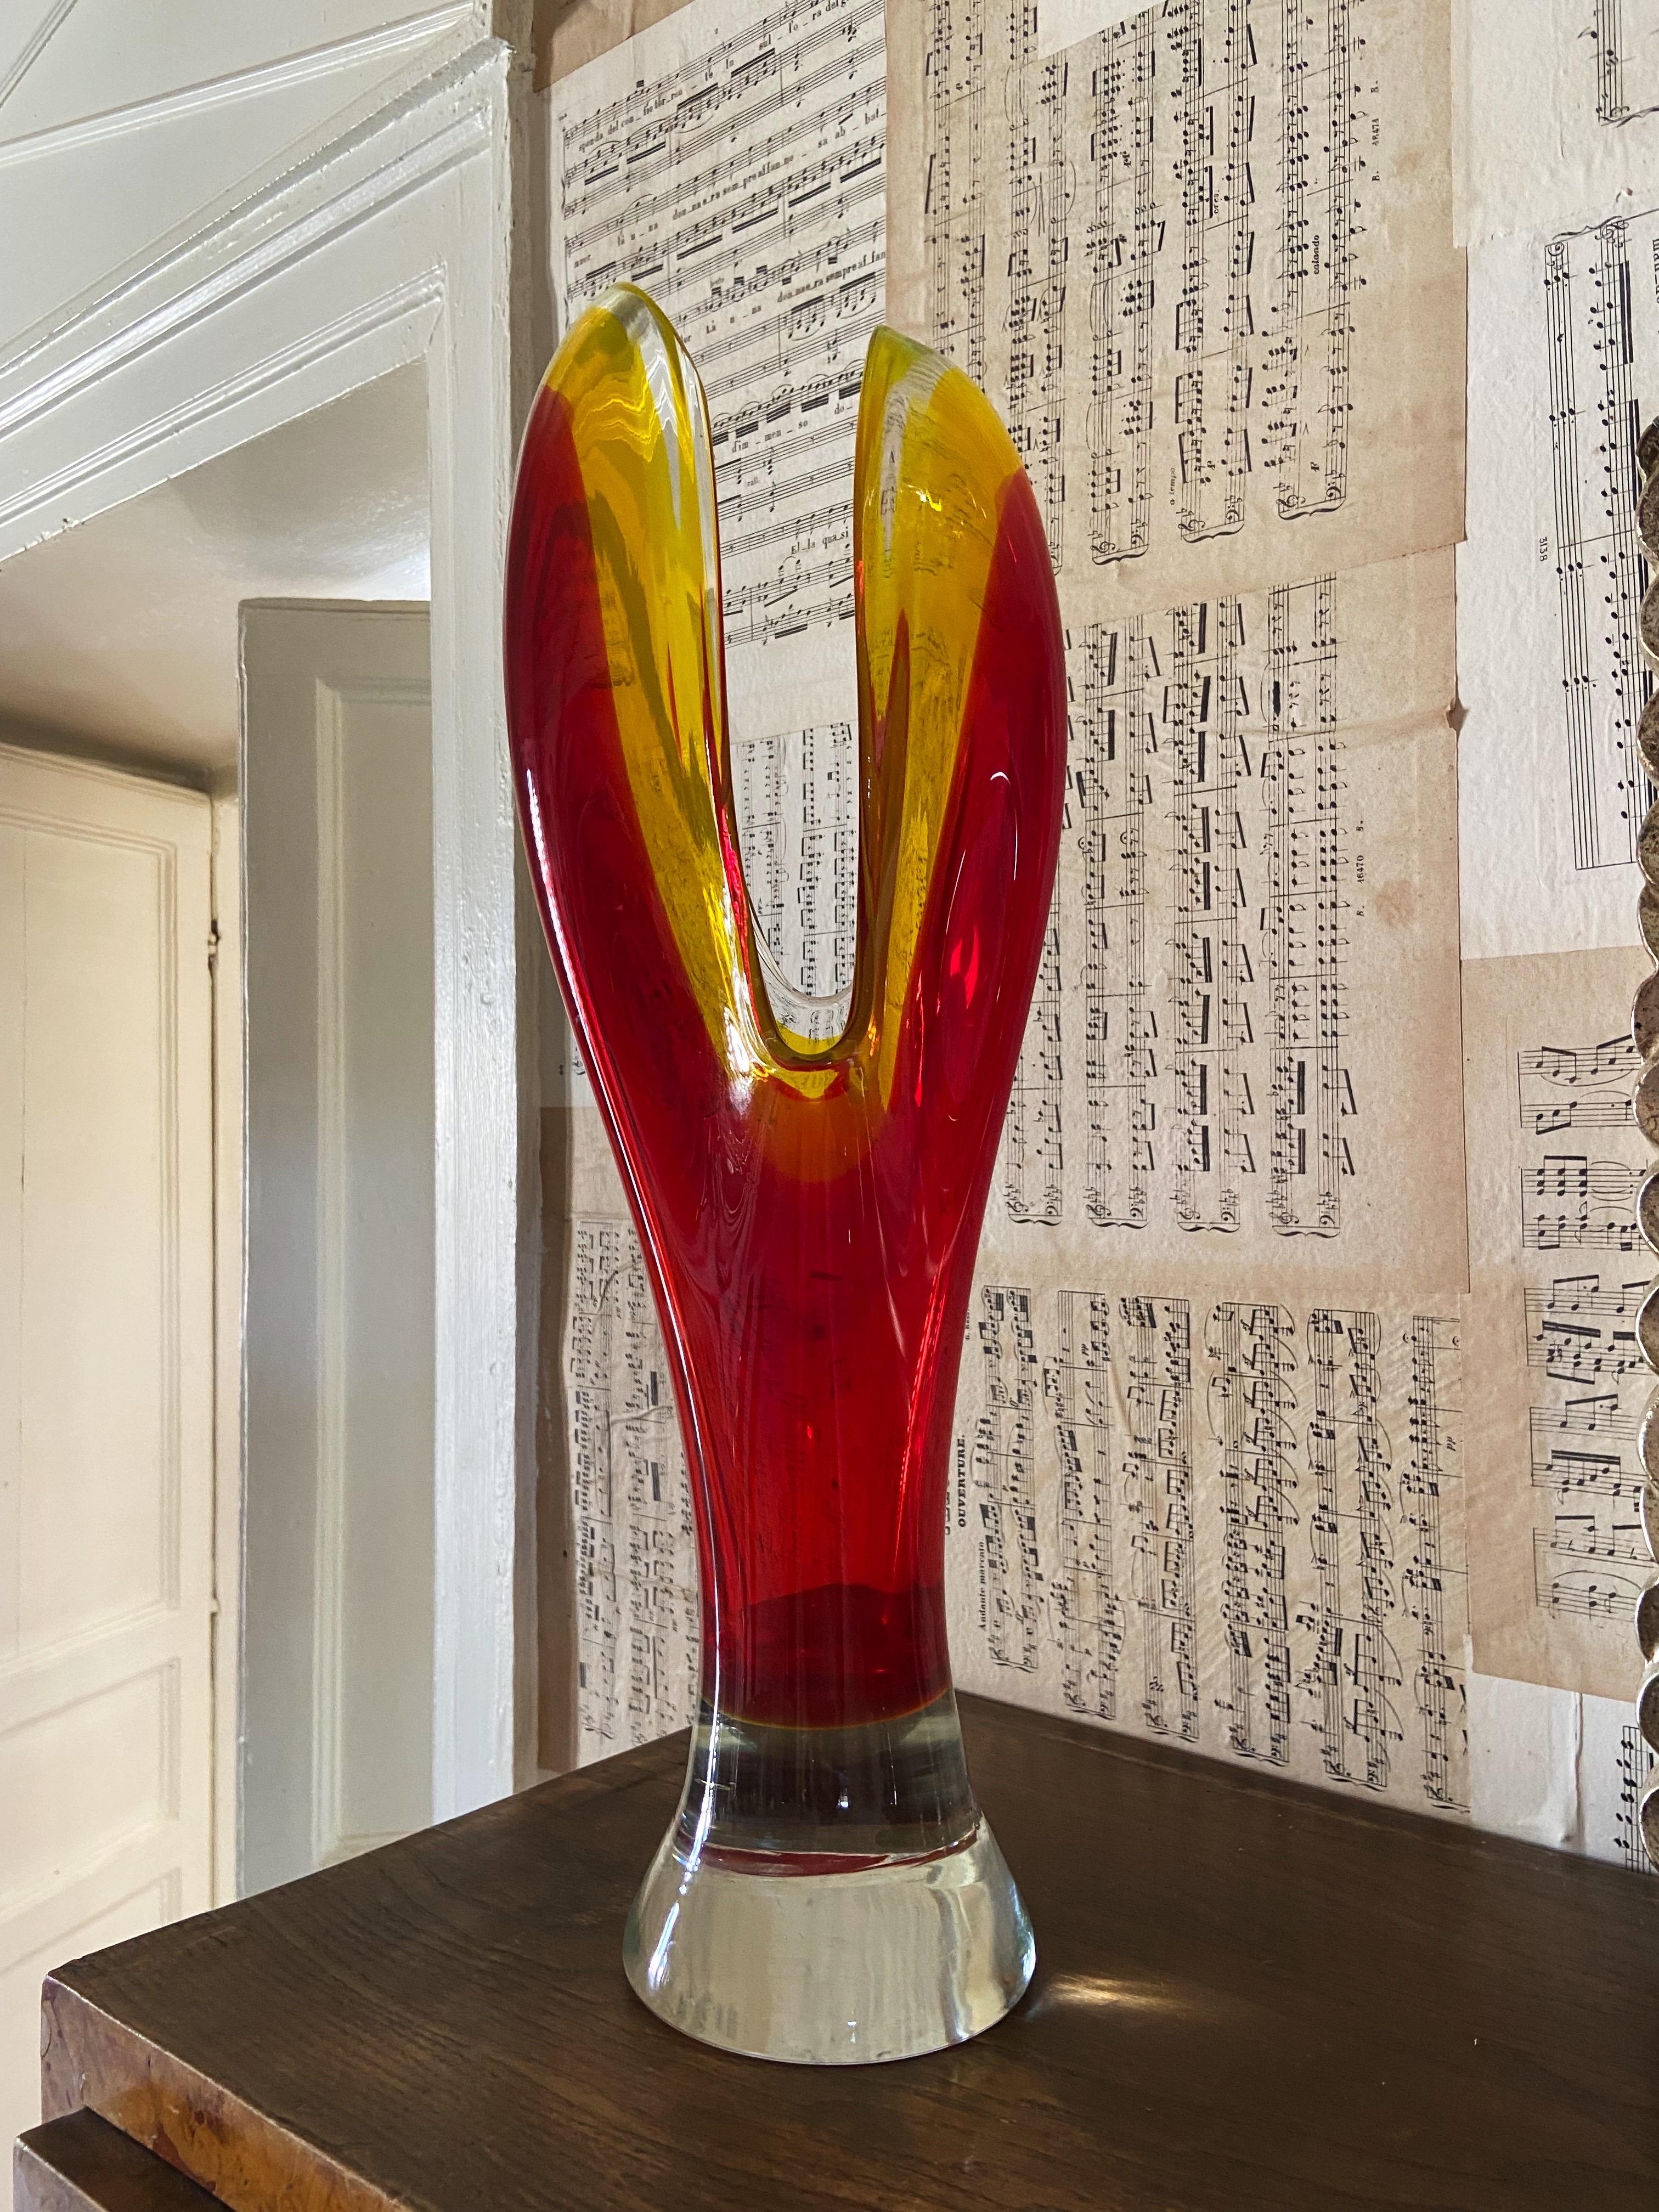 Rare mid-century Italian Murano Sommerso art glass designed by Flavio Poli, made for Seguso Vetri D’Arte. 1960s
In good condition but it shows some signs of age and use. No chips on the glass

Details
Creator: Flavio Poli
Dimensions: Height: 47